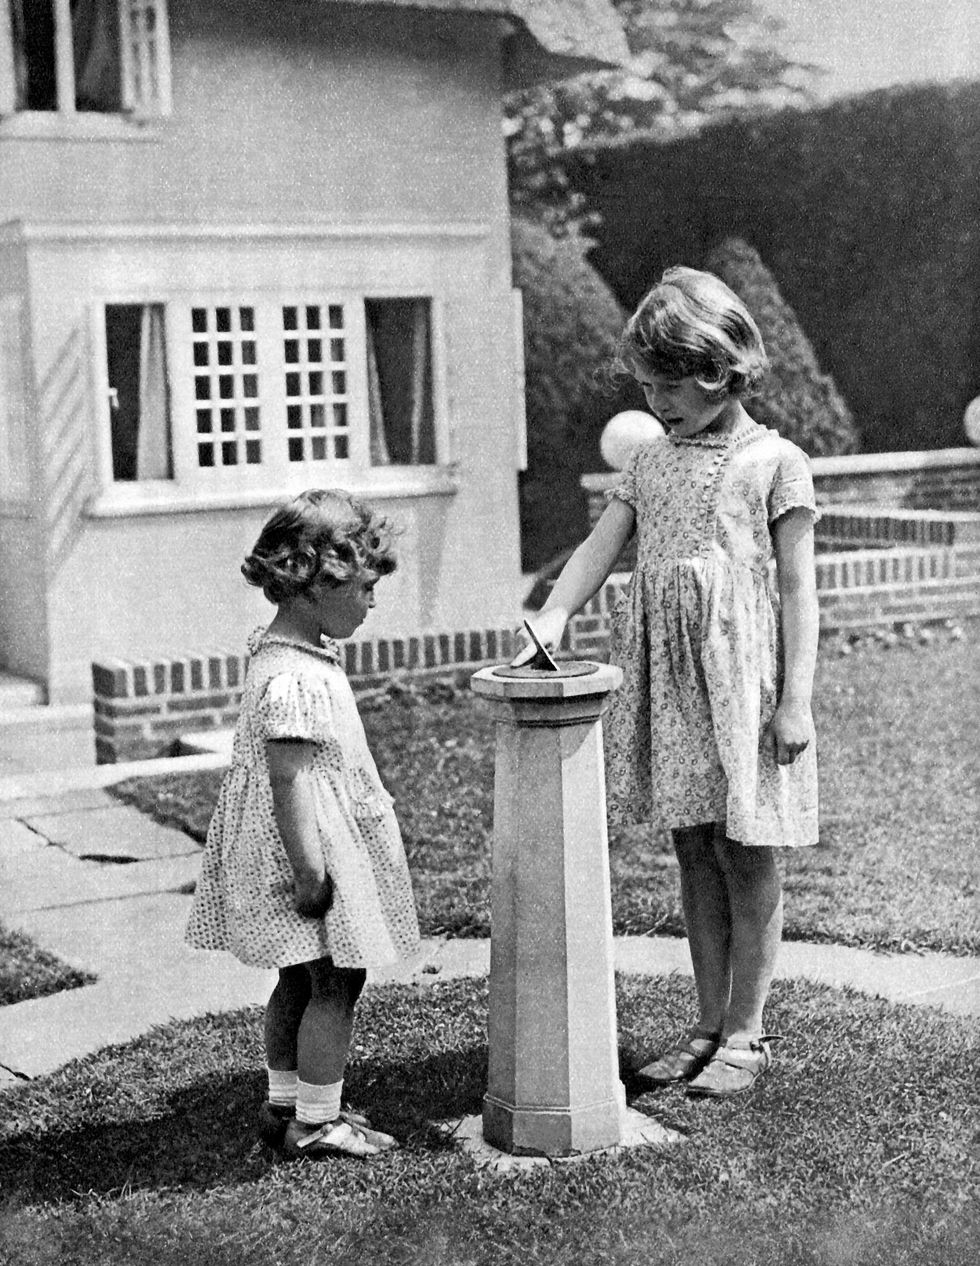 princess elizabeth to become queen elizabeth ii and princess margaret as children in the grounds of the model house y bwthyn bach presented to them on elizabeths 6th birthday by the people of wales, 1933 photo by culture clubgetty images